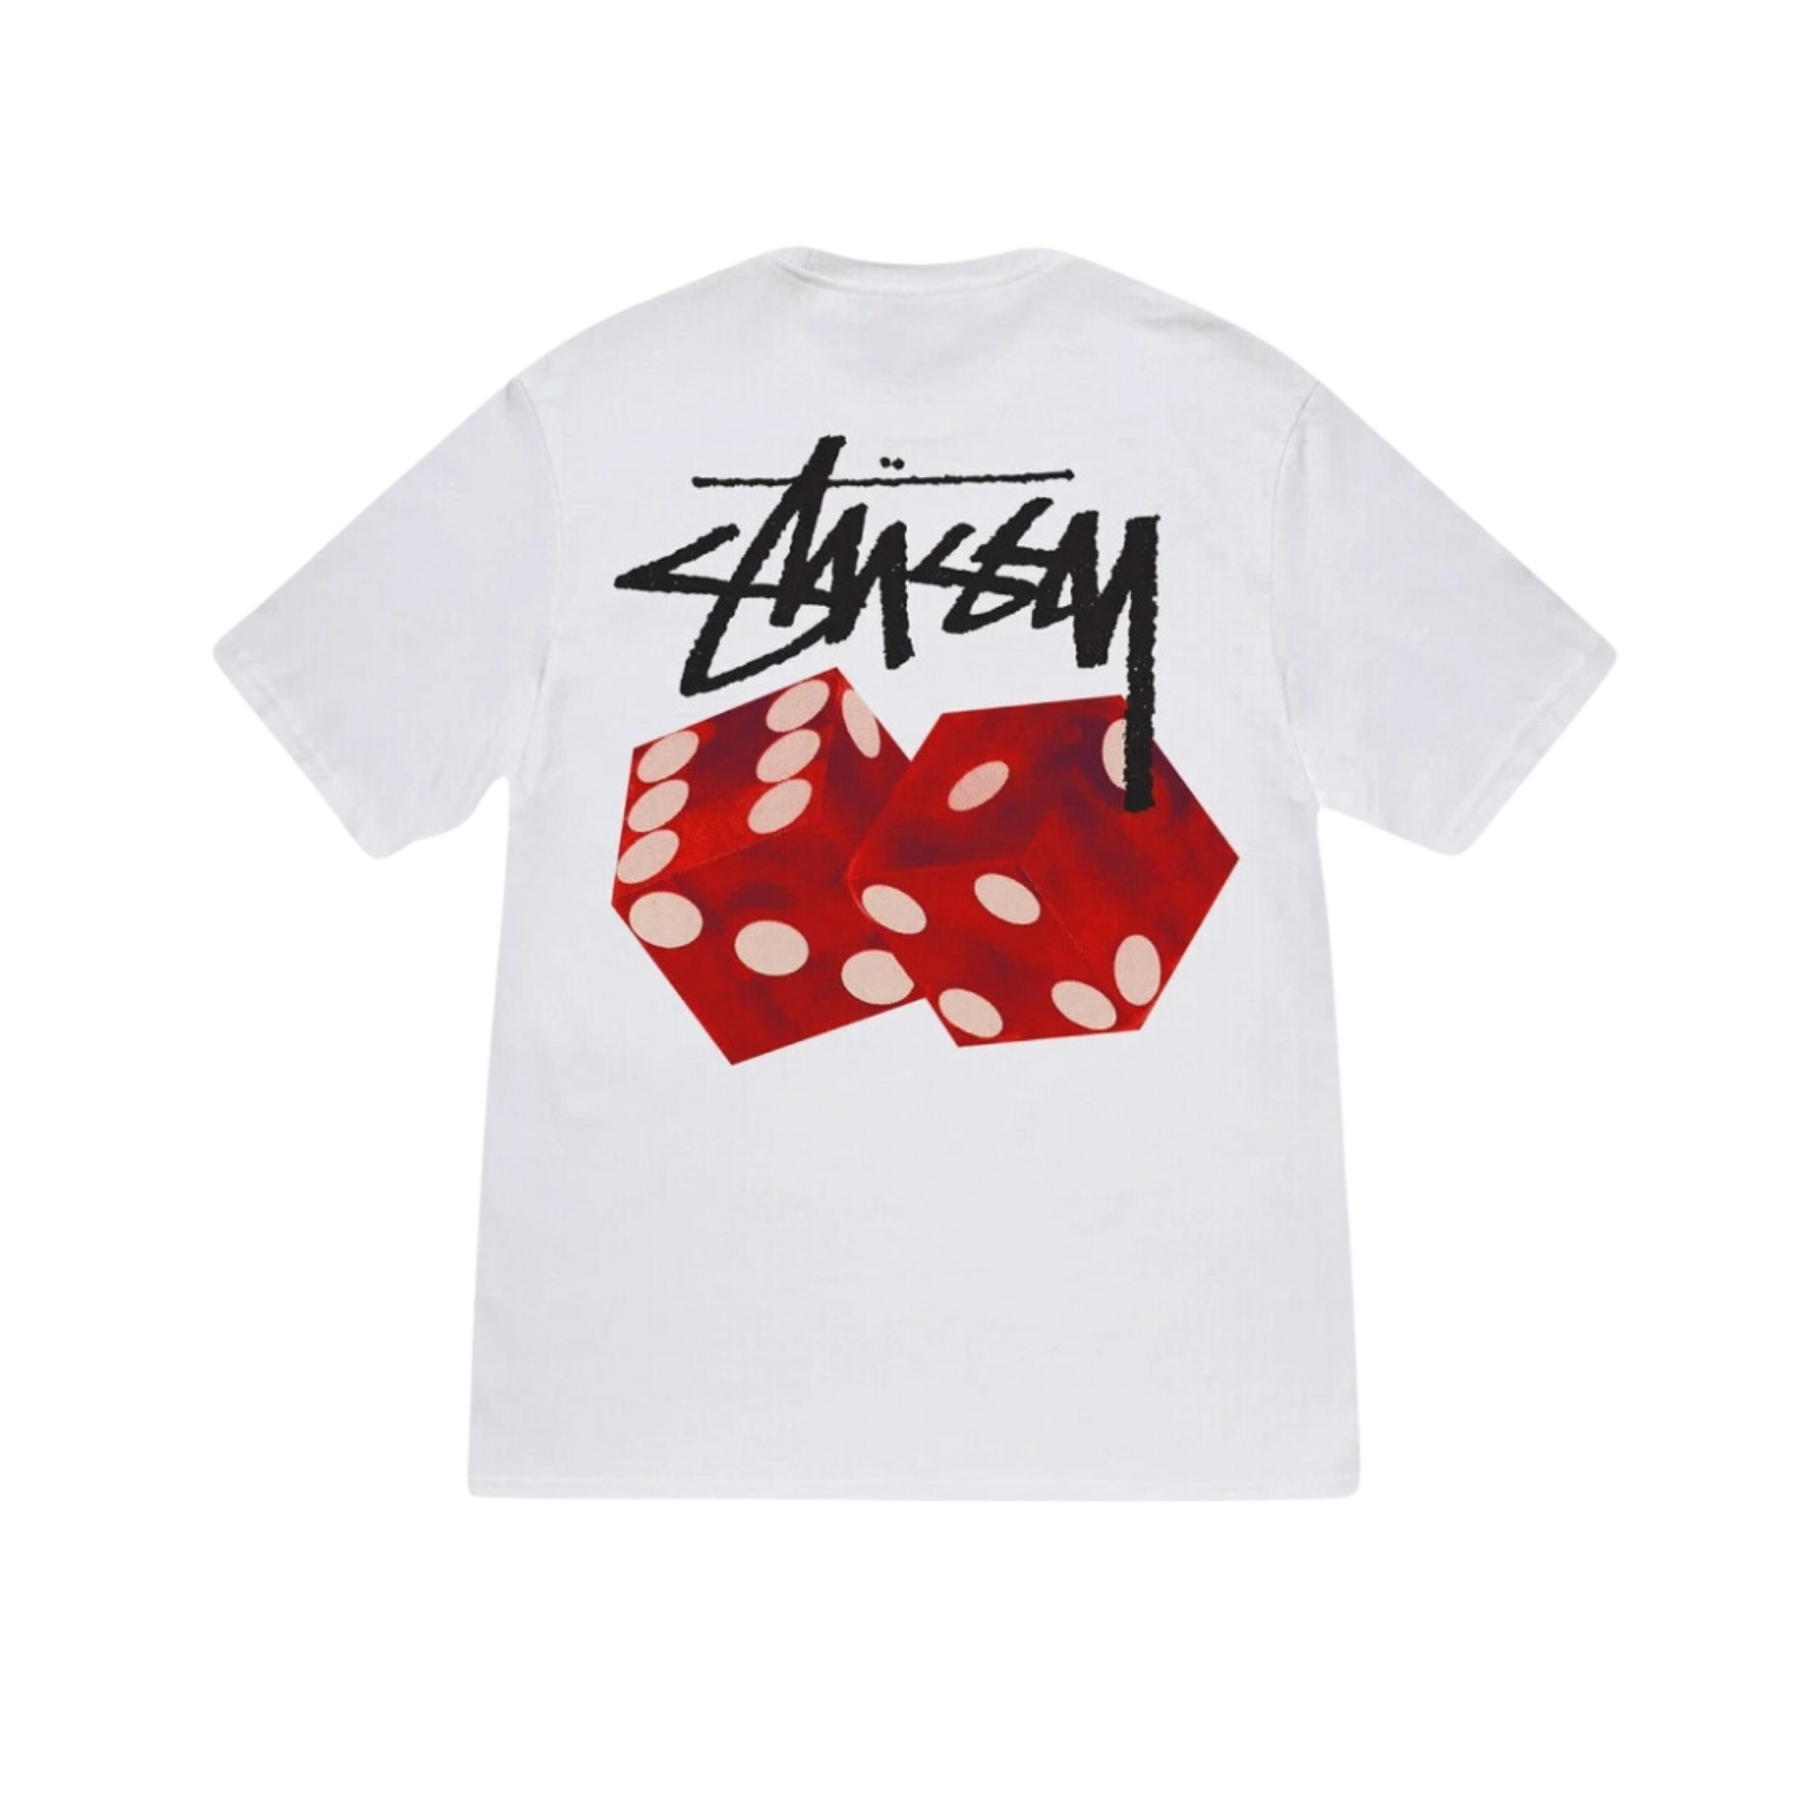 Stüssy Diced Out T-shirt "White"